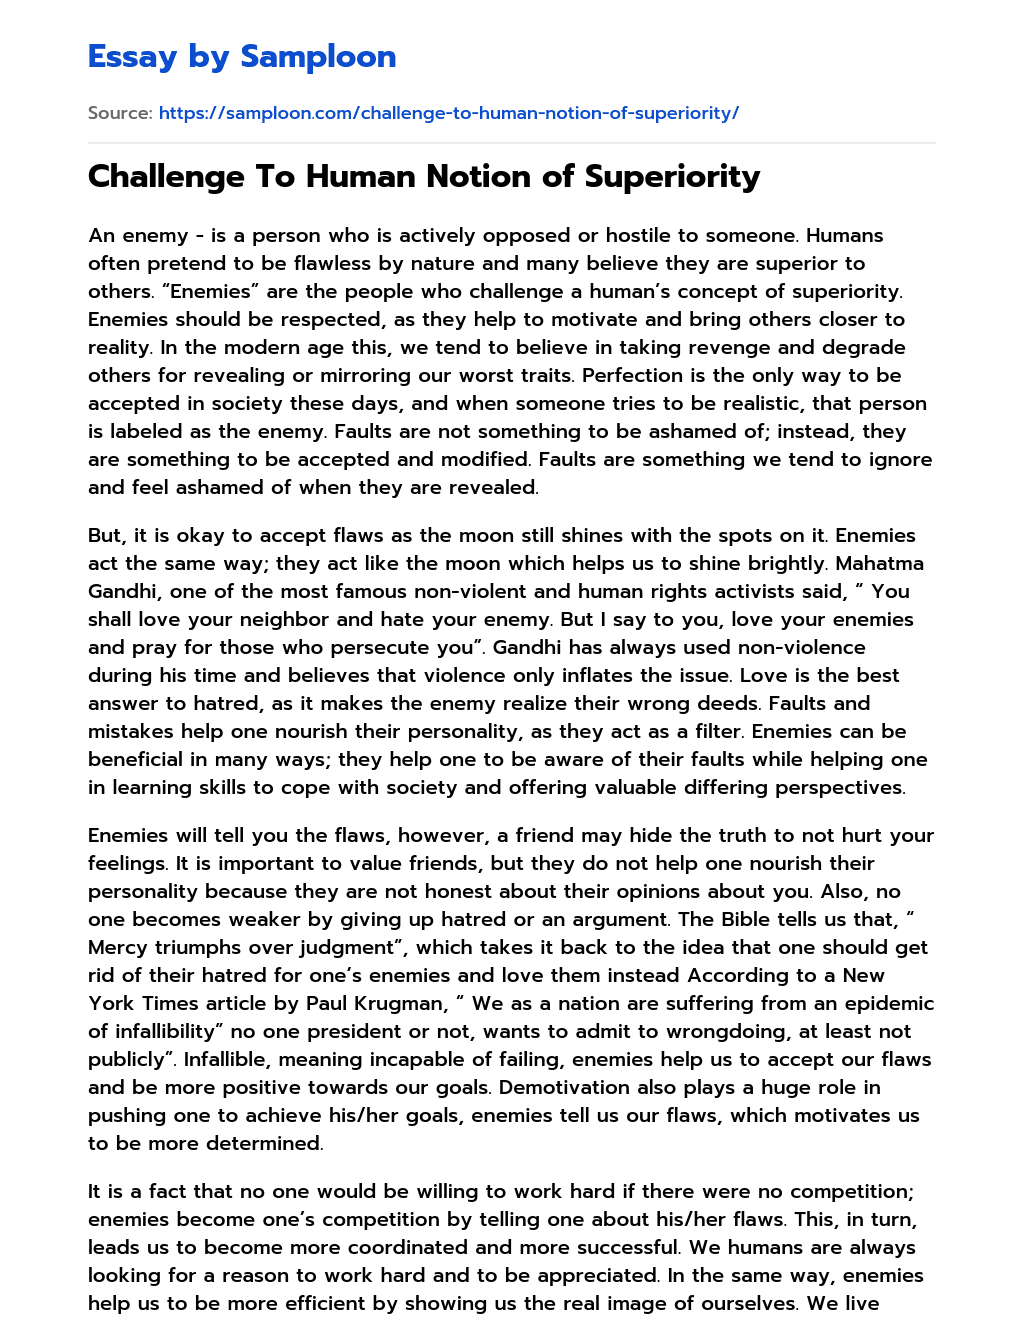 Challenge To Human Notion of Superiority essay